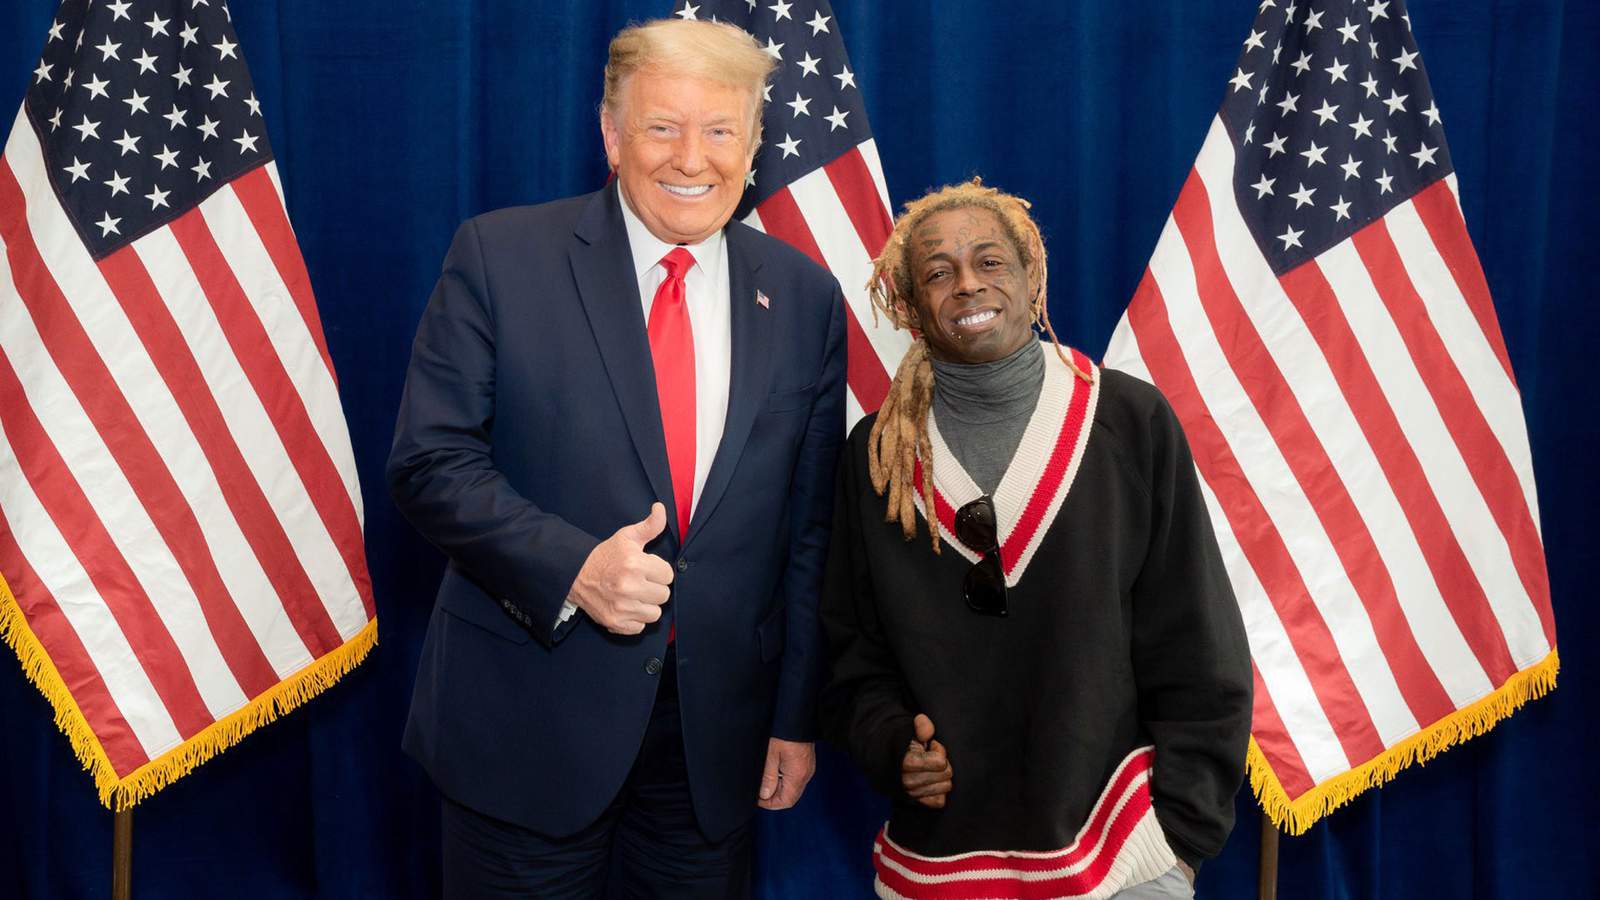 Trump’s busy itinerary in Florida includes meeting with Lil Wayne